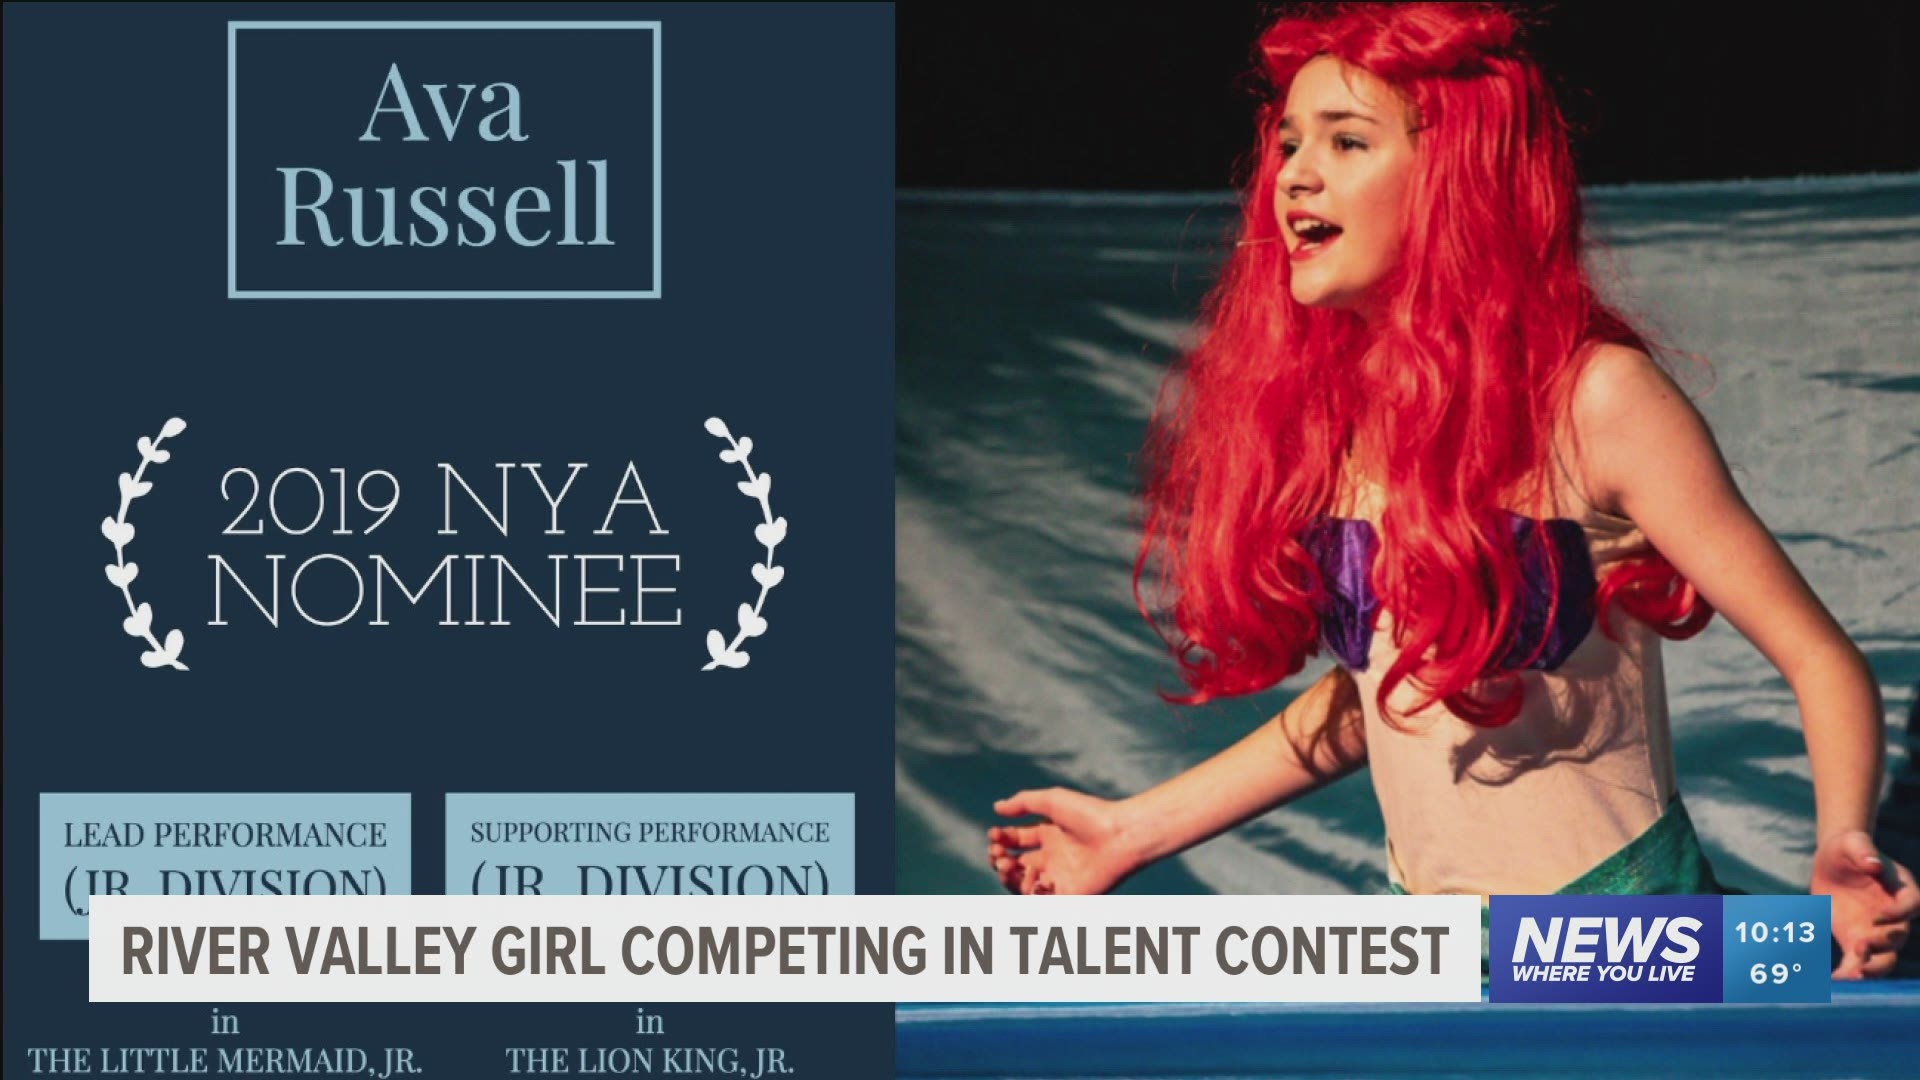 River Valley girl competing in talent contest.